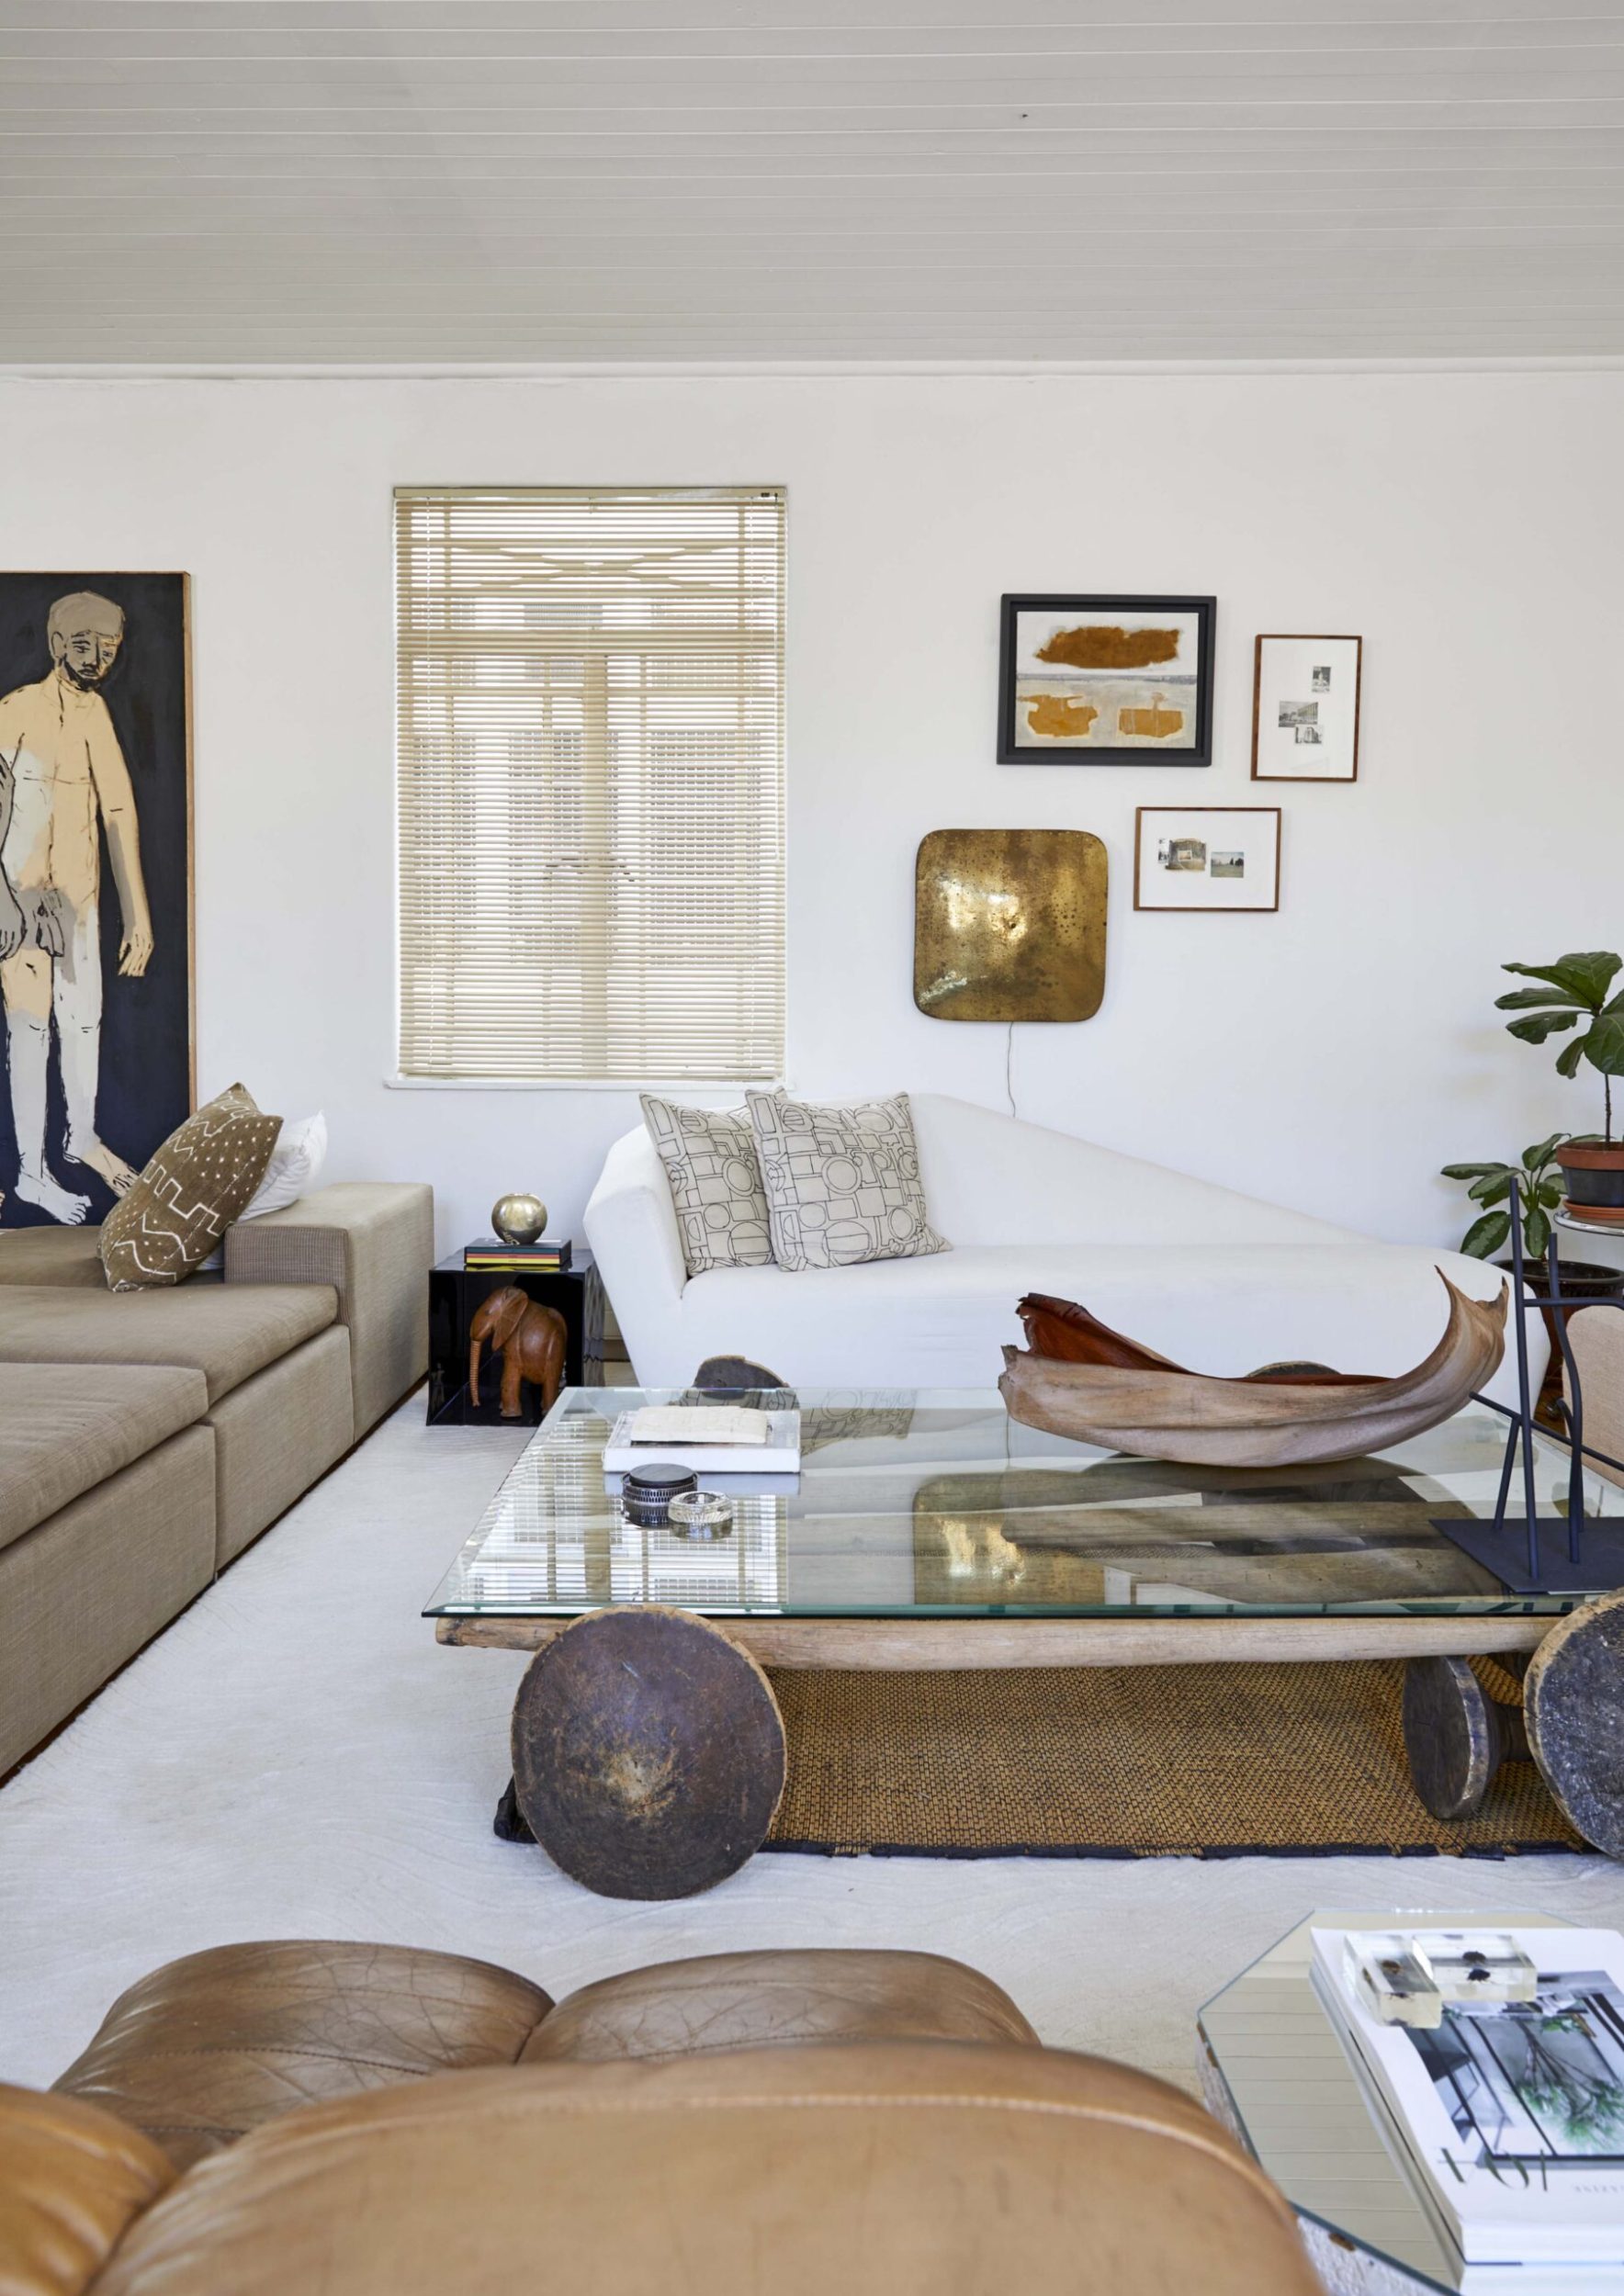 Living room with white walls , a white carpet, brown leather couches  and assorted hanging wall art